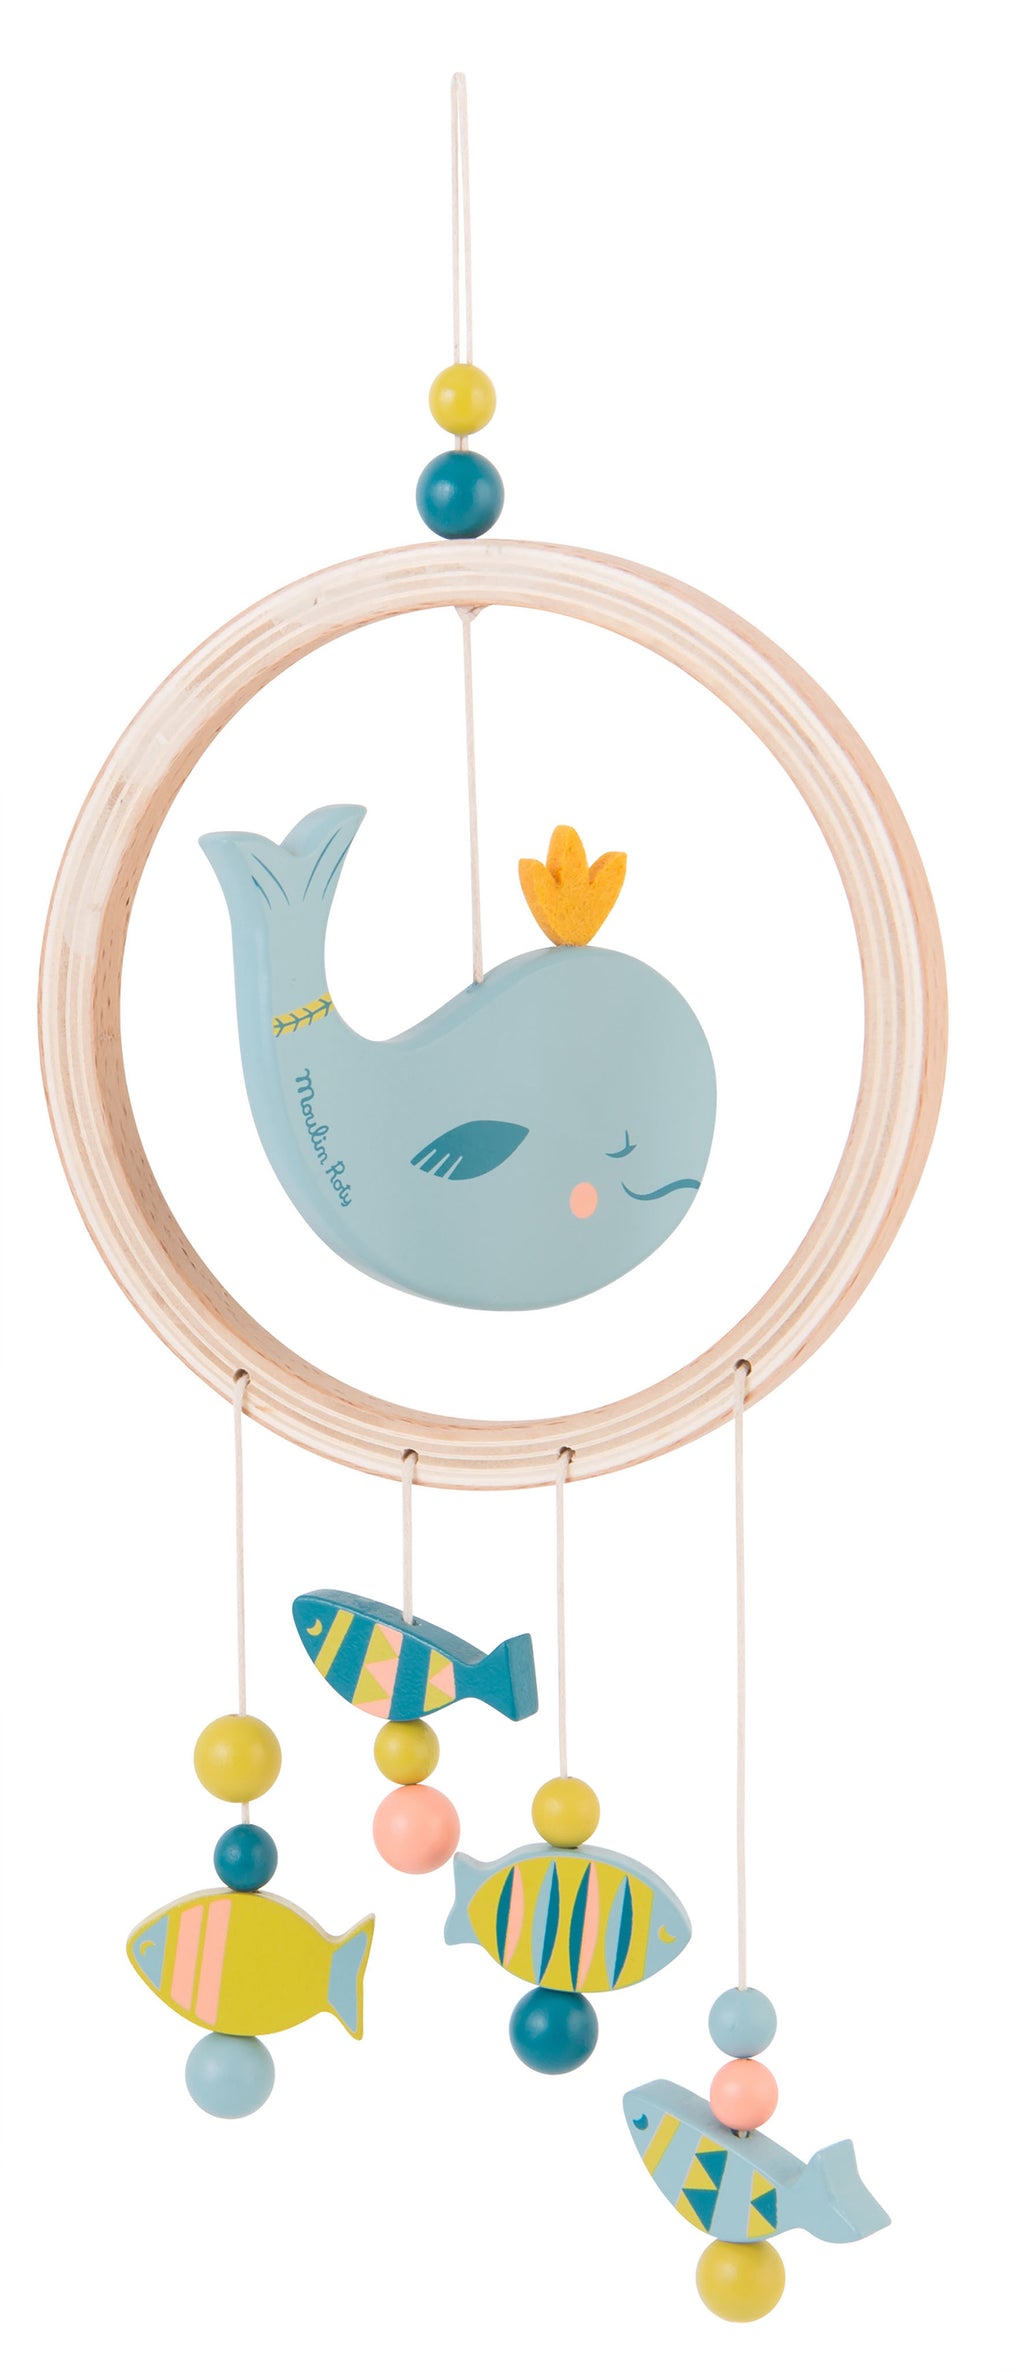 This wooden dream catcher features a beautiful whale in the middle of a circle decorated with blue, yellow and pink beads and felt features. 